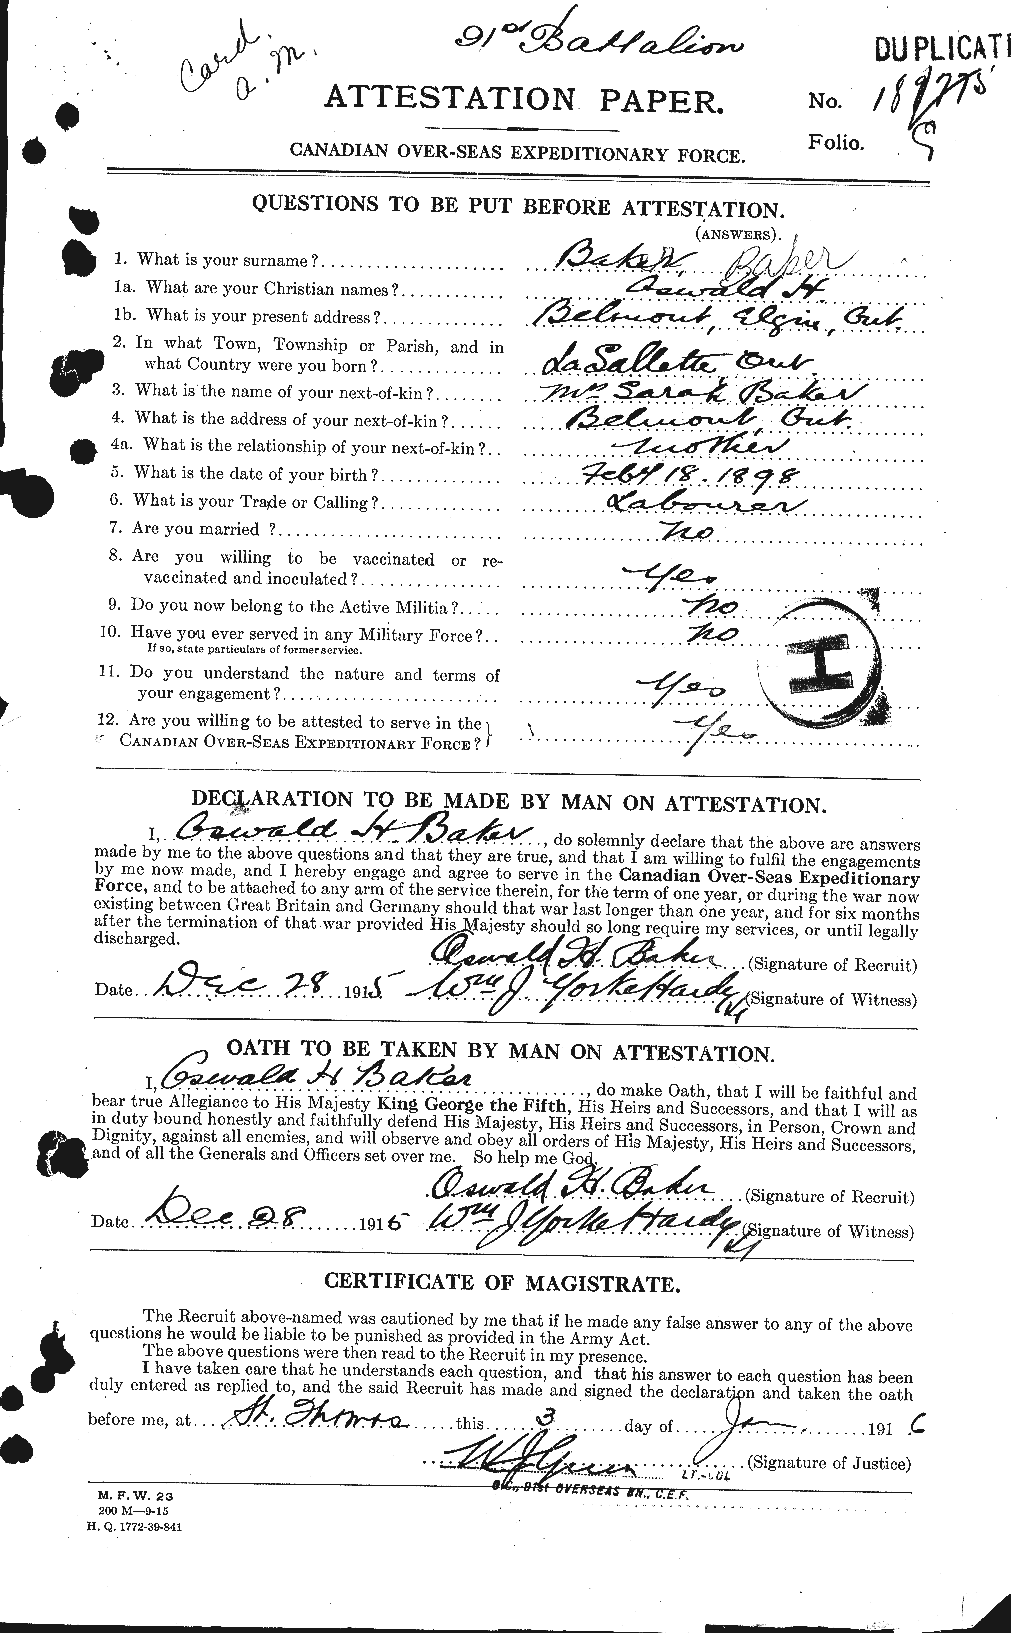 Personnel Records of the First World War - CEF 222283a